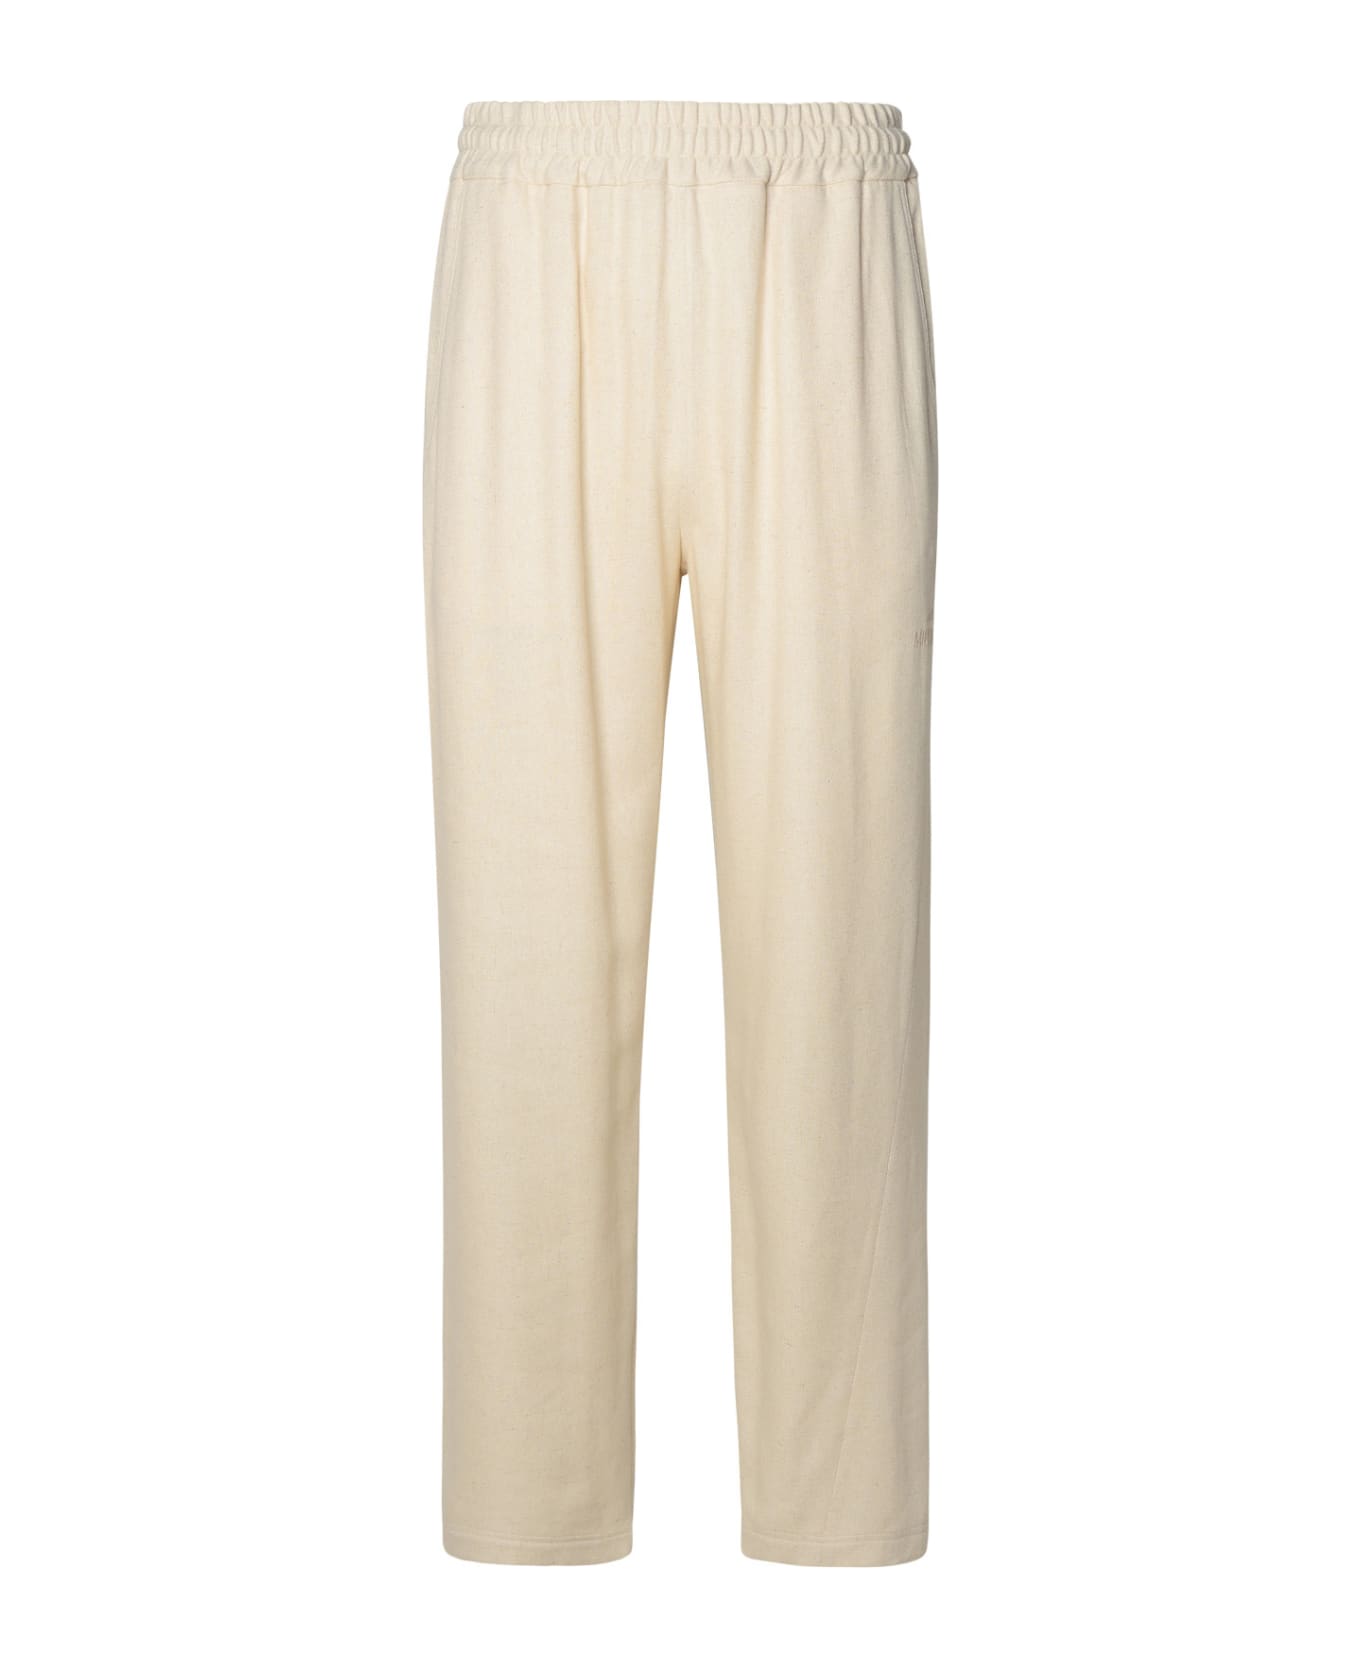 GCDS Ivory Linen Blend Trousers - Off White